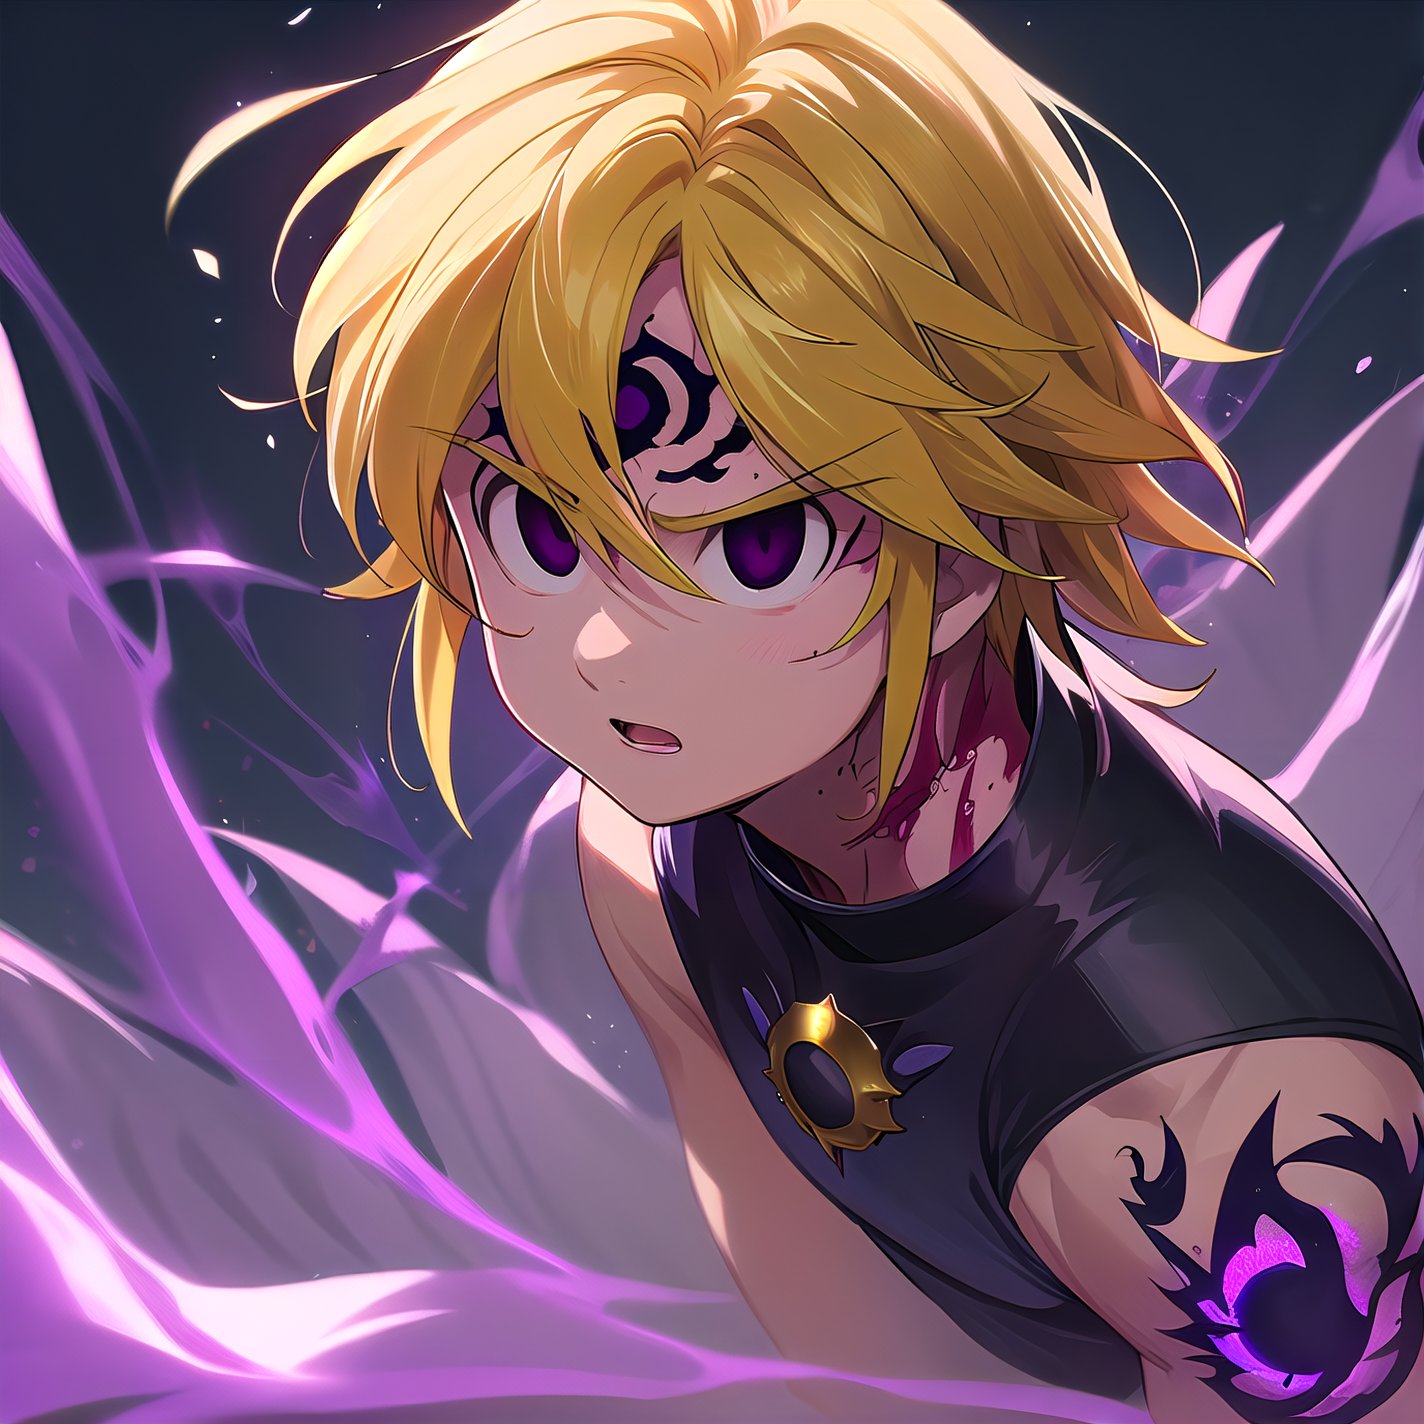 solo, male, depth of field, ((masterpiece, best quality)), demon, evil, The left part of the body is made of purple energy, purple aura, meliodas_nanatsu_no_taizai,blonde hair, empty eyes, fantasy world in background, meliodas in demon form, Blood coming from his mouth, Purple tattoo on his forehead, black eyes,